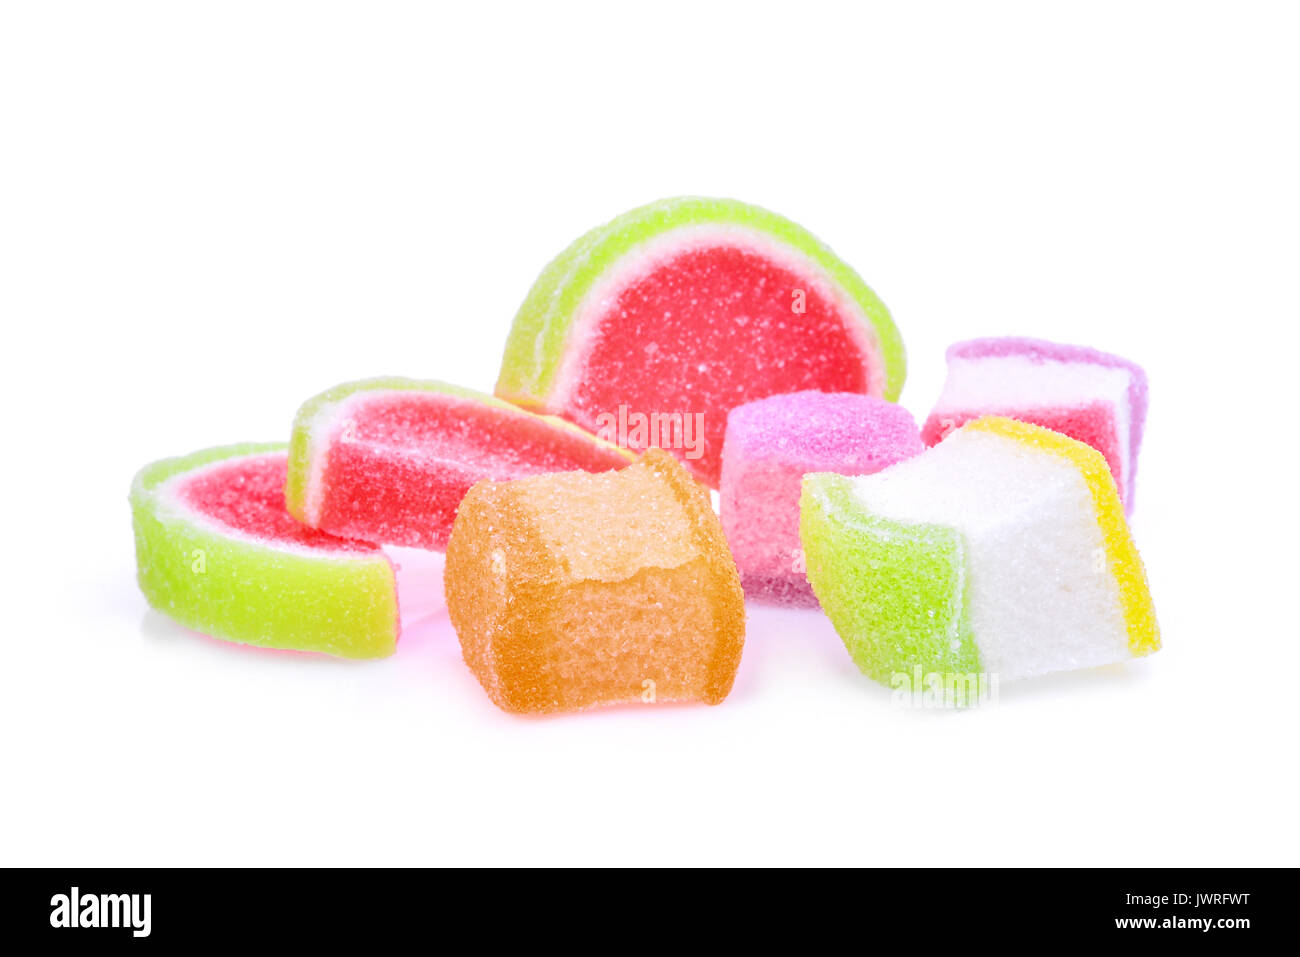 jelly sweet, flavor fruit or candy dessert colorful with sugar isolated on white background, food is not good for health Stock Photo